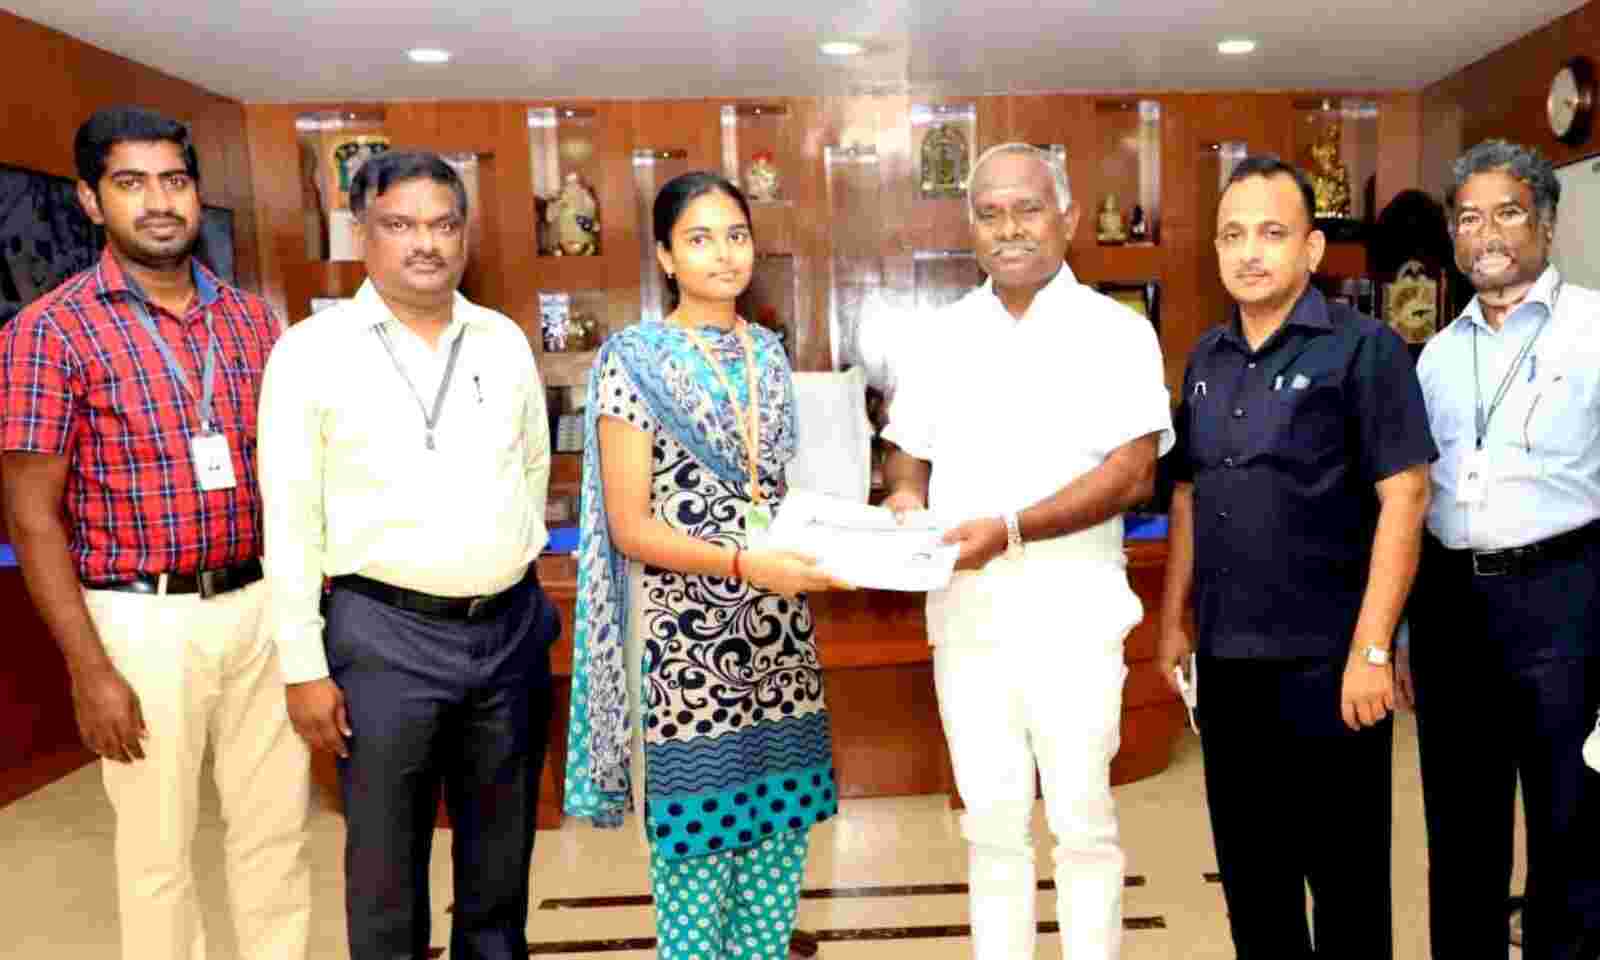 Salem engineering student is amazing! Jobs at Infosys for Rs 10 lakh